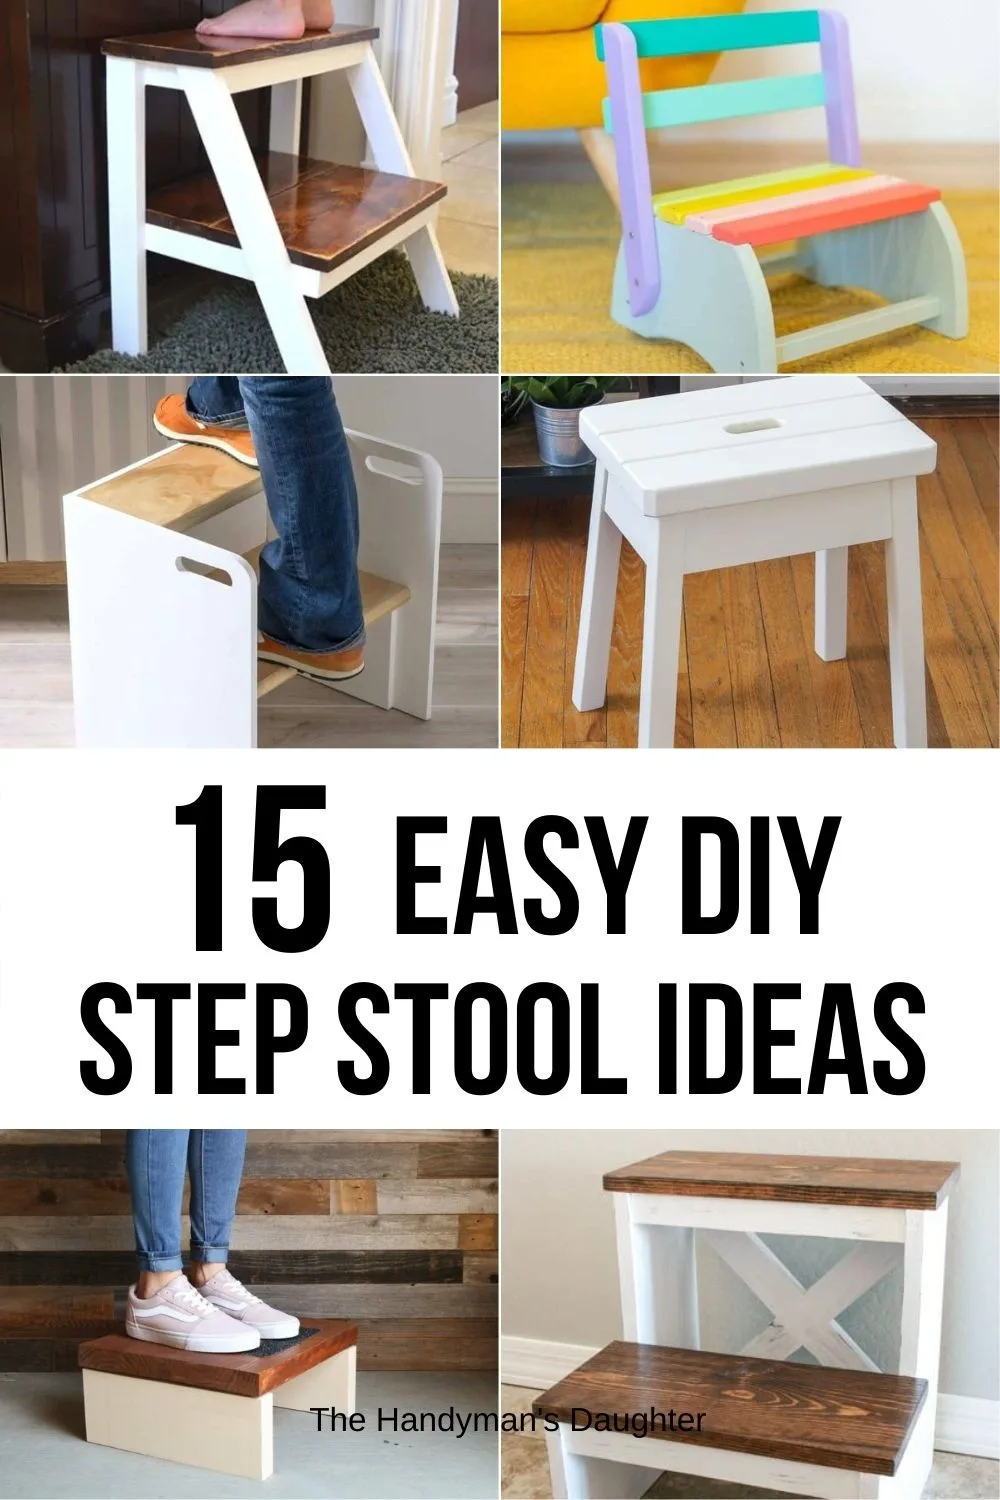 Desk Feet Rest Under Desk Foot Stool Step Stool Easy To Clean